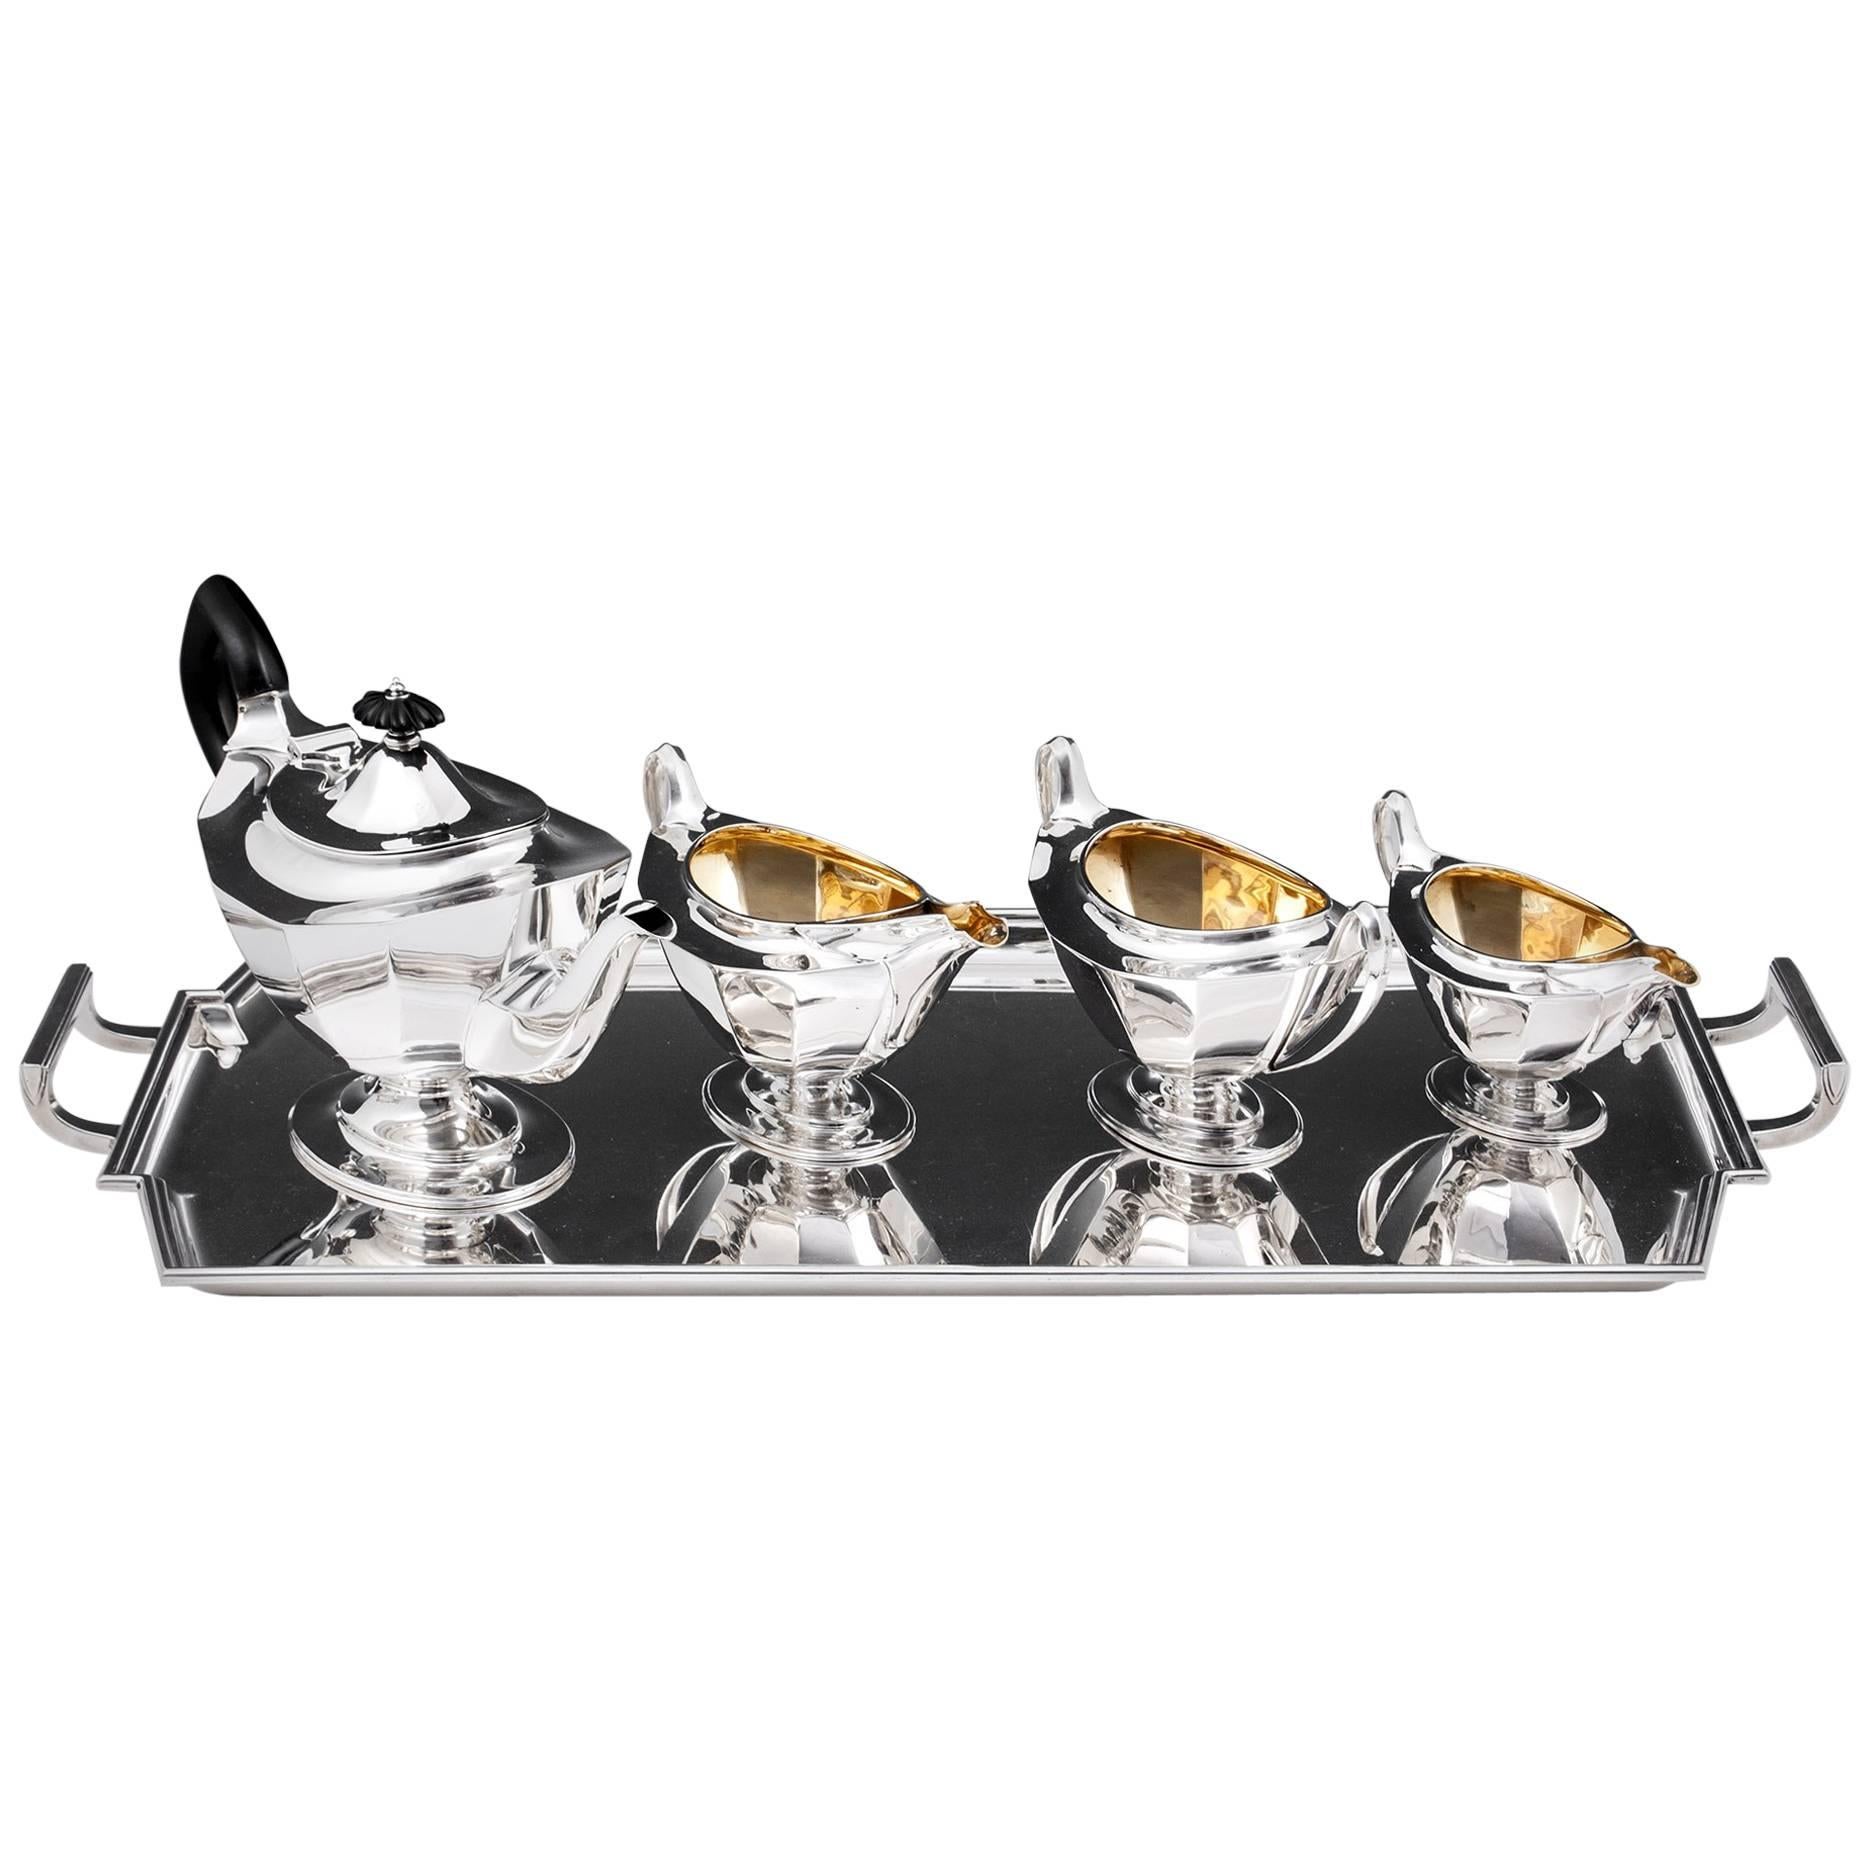 Art Deco Sterling Silver Tea Set with Ebony Handles, 20th Century For Sale